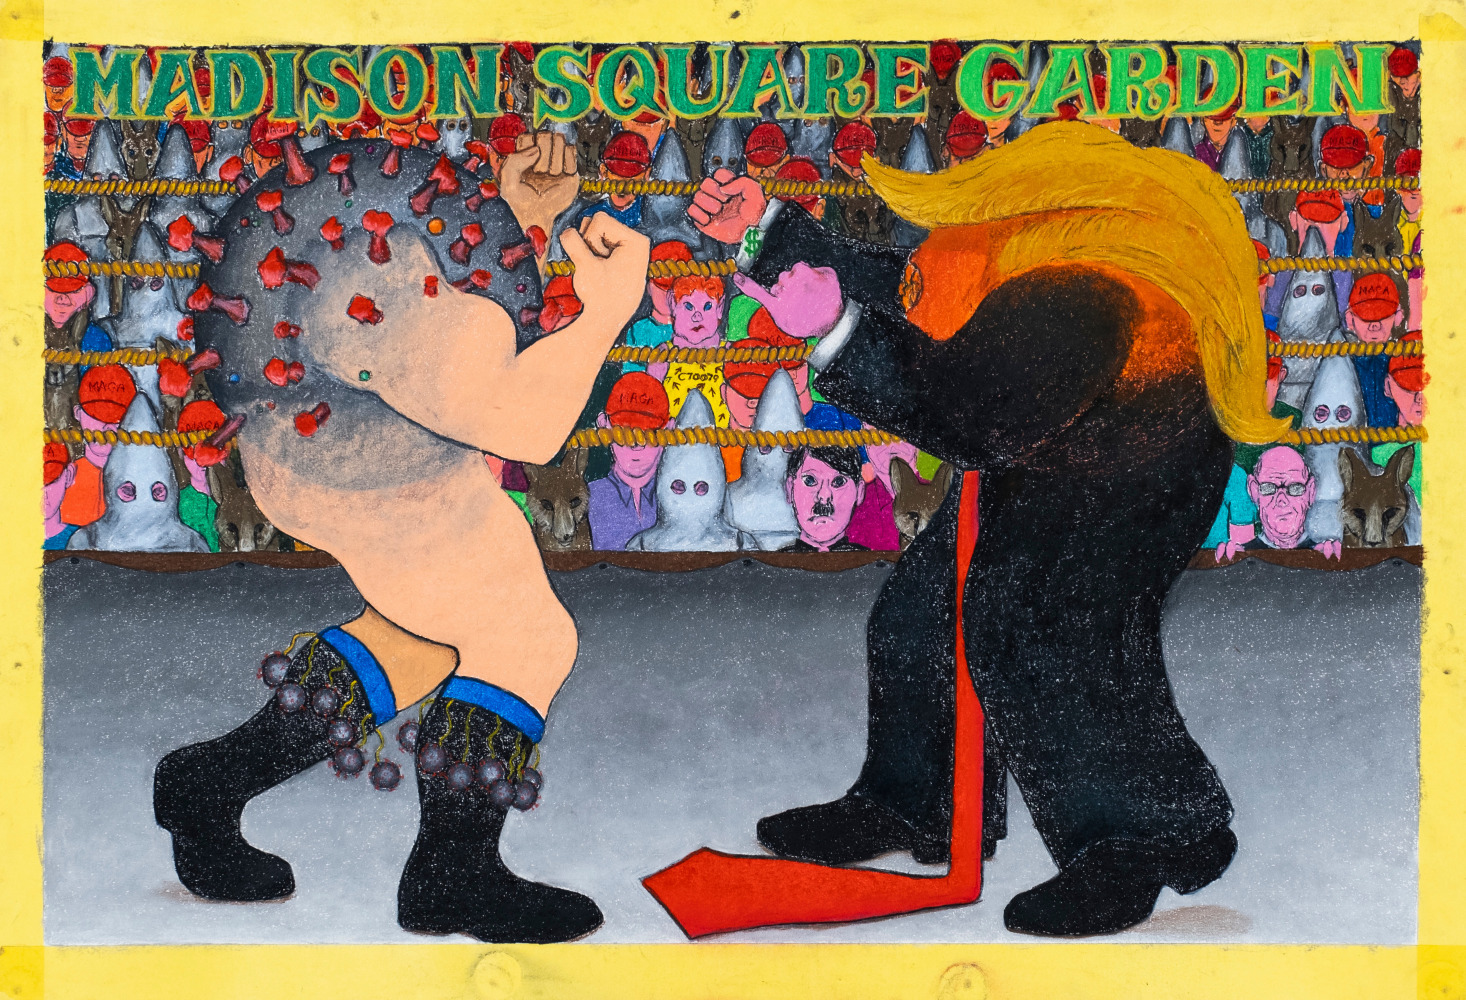 Gordon Hookey
Ready to Rumble, 2020
Oil pastel and pencil on paper
30.5 x 44 inches